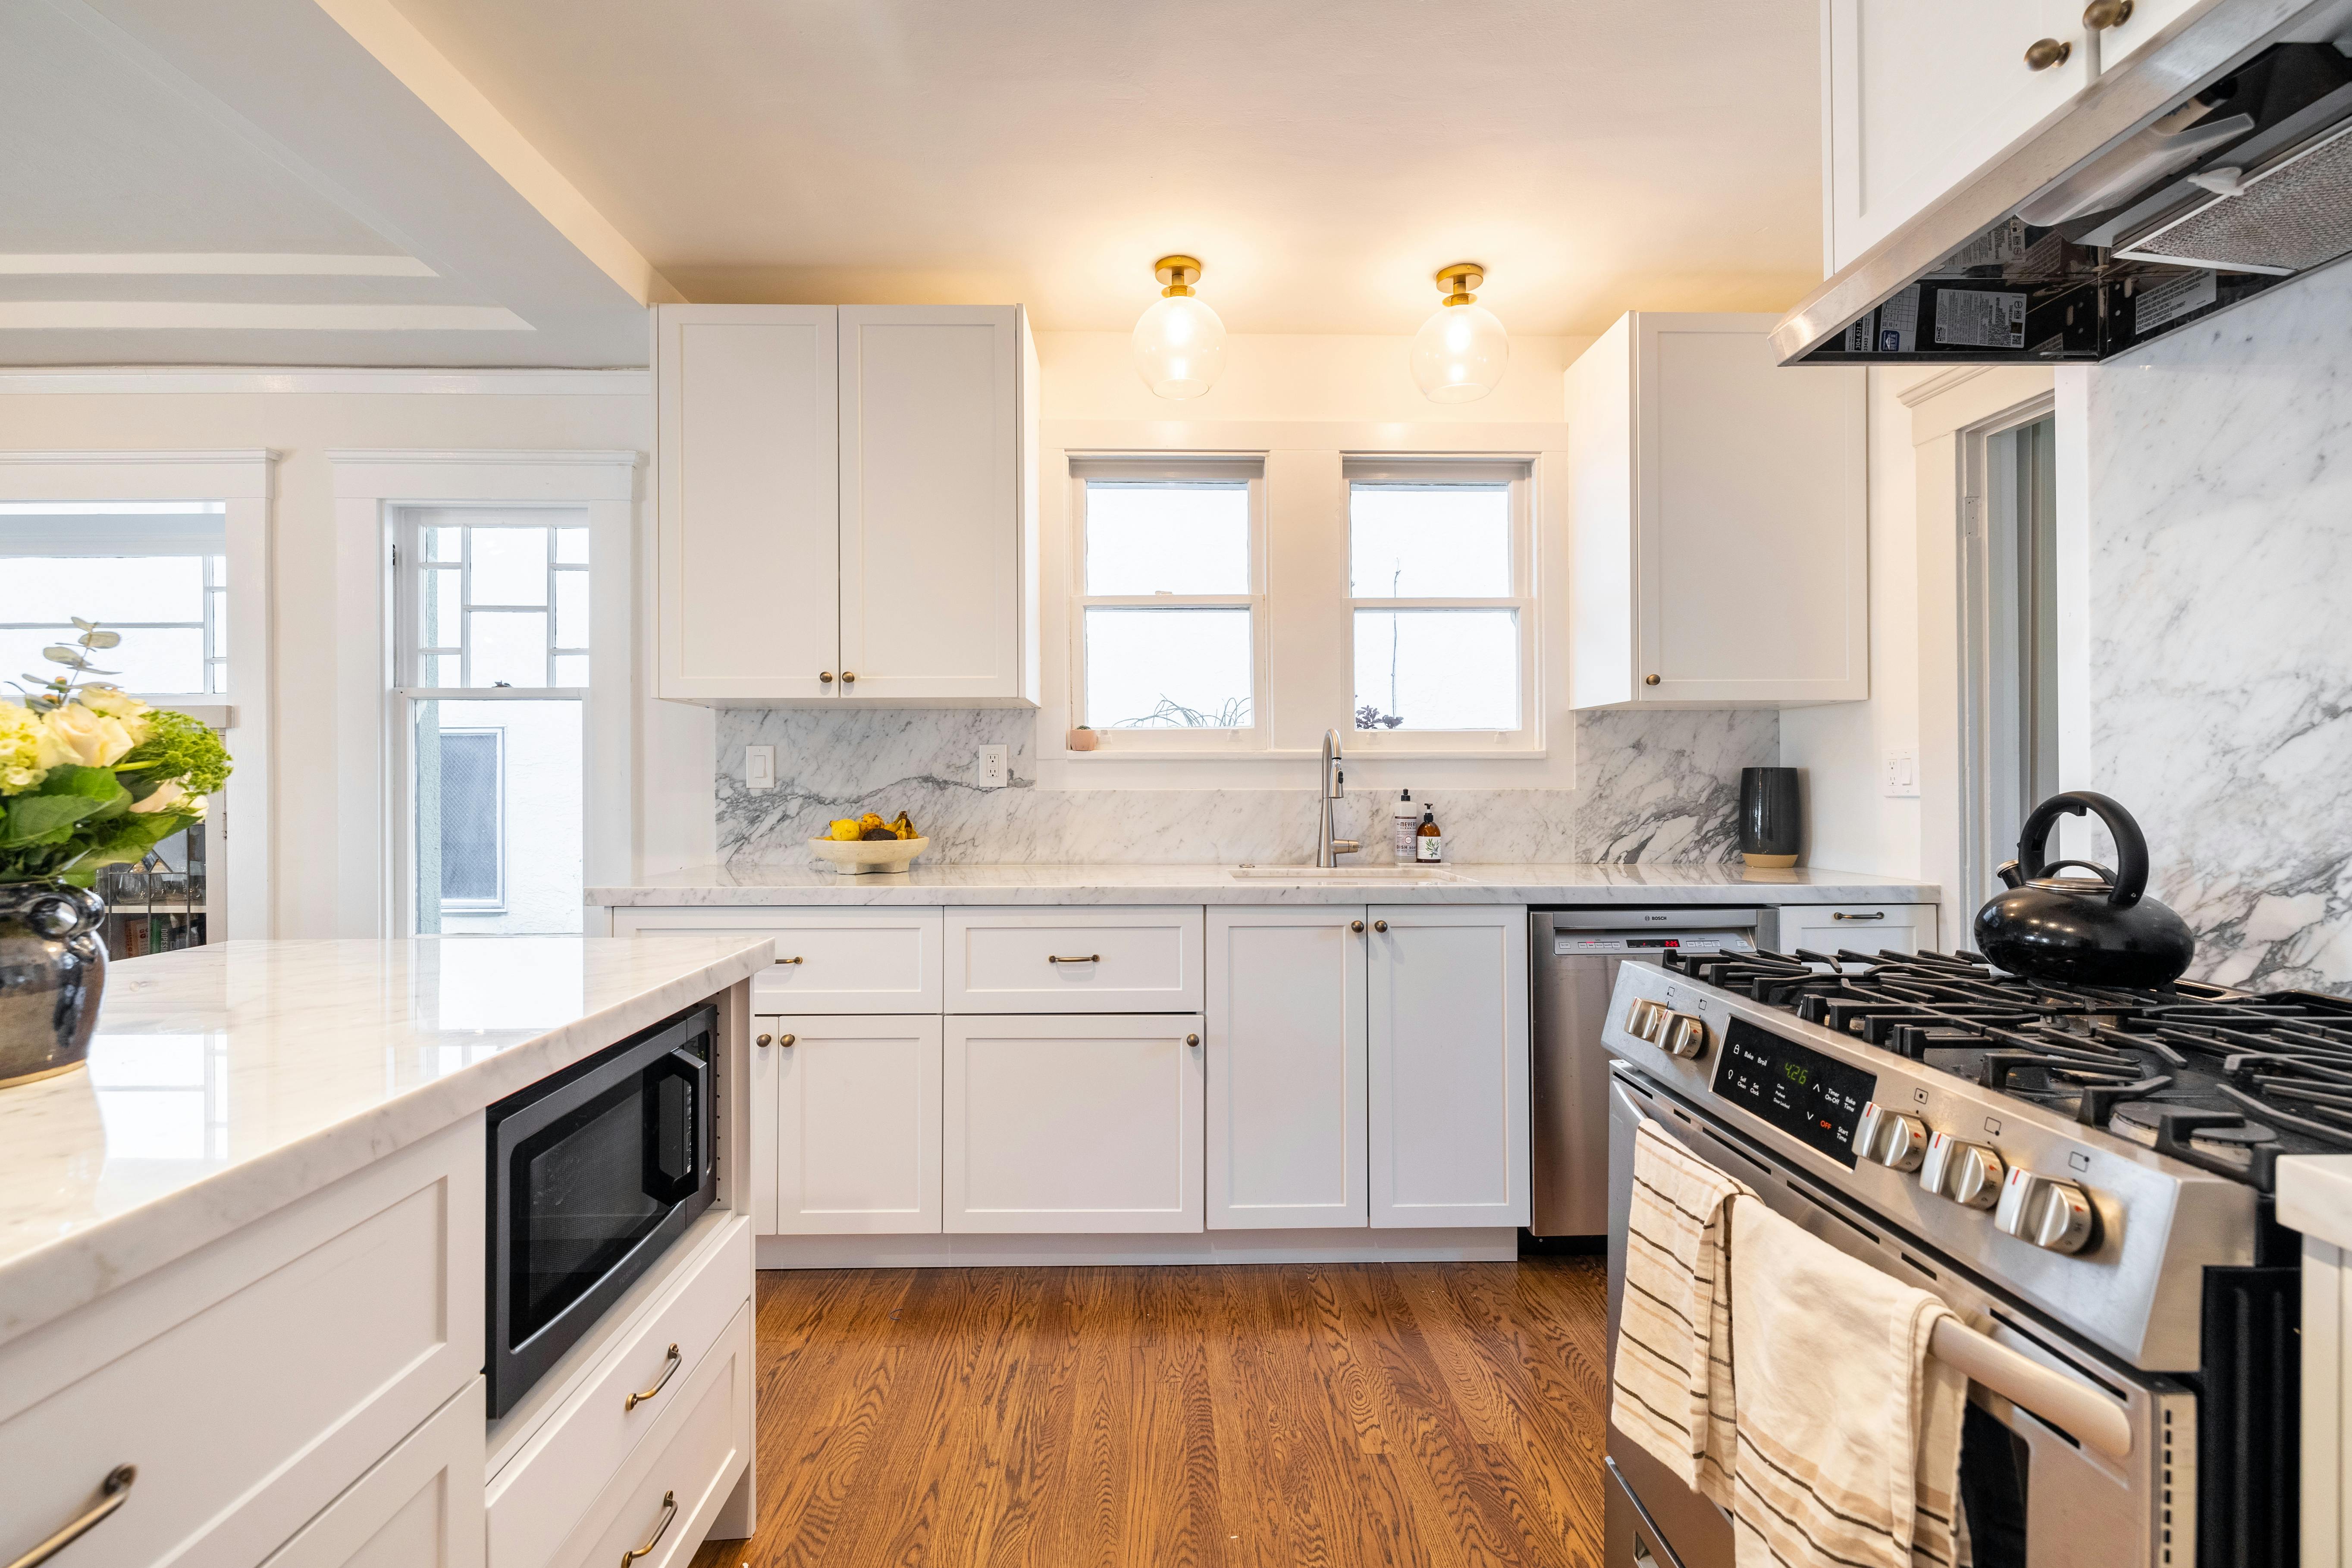 How to renovate your kitchen without changing the cabinets - The Washington  Post